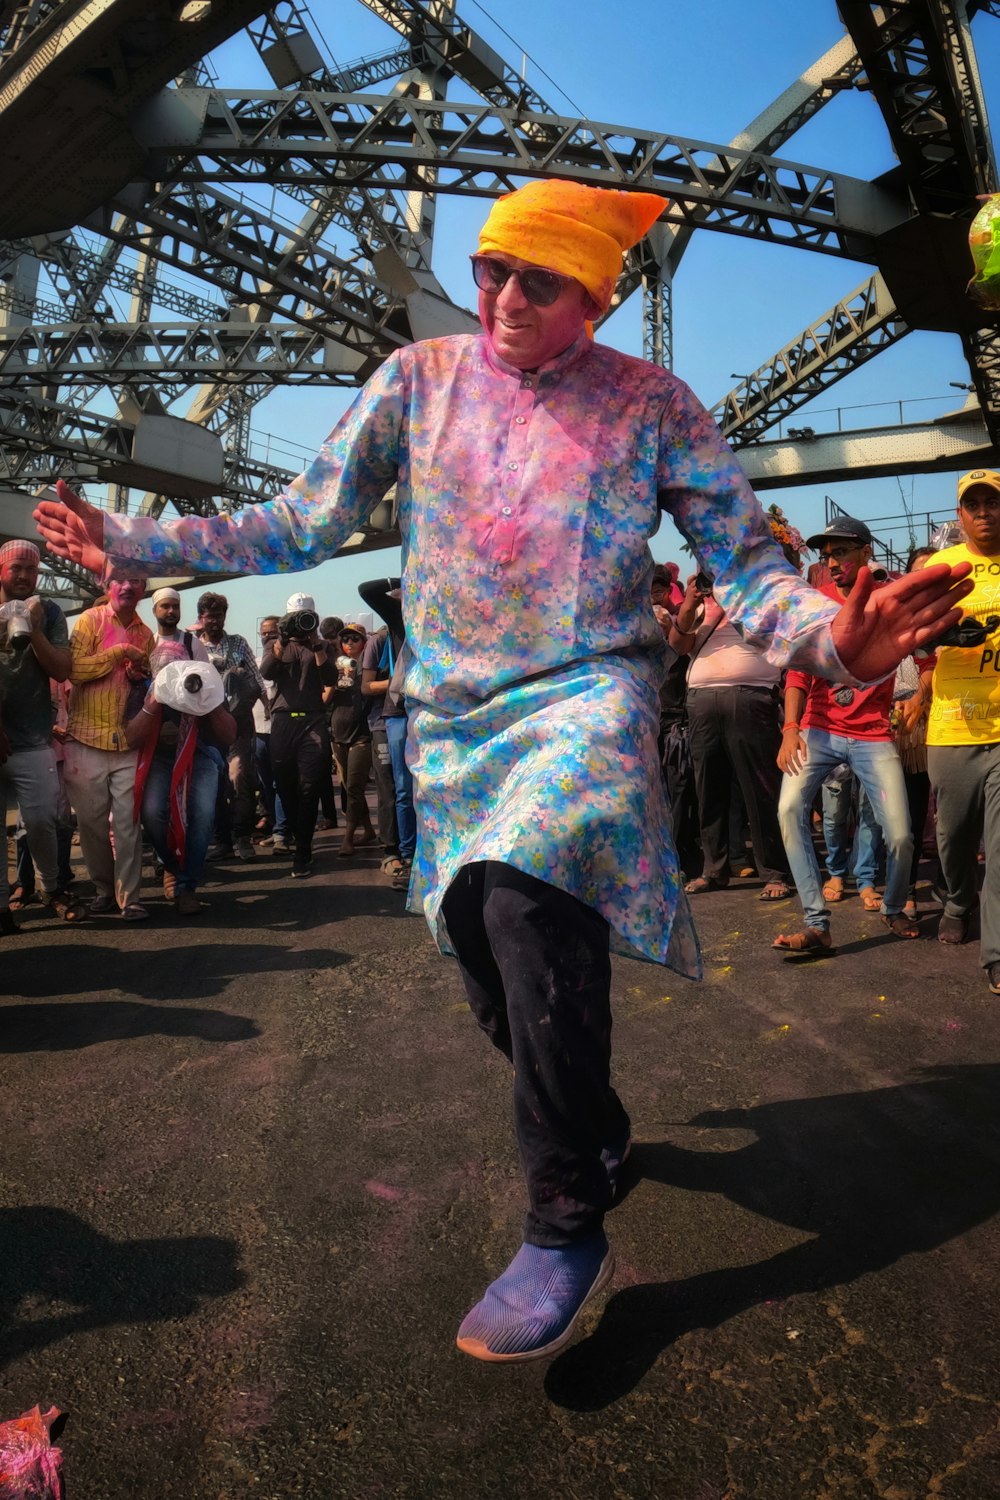 a man in a colorful outfit is dancing